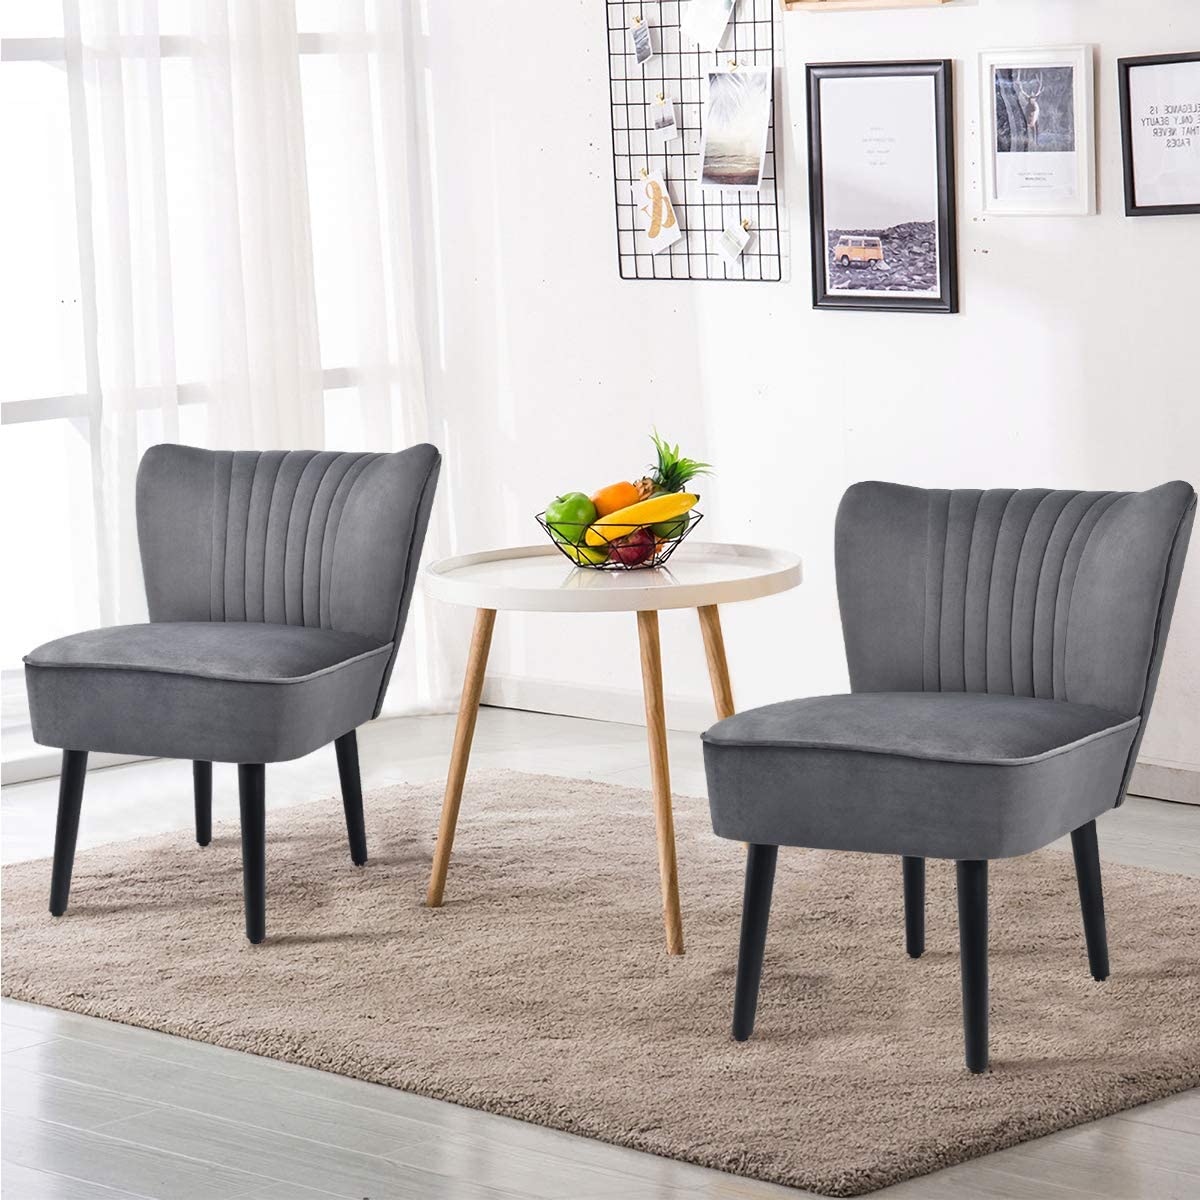 Set of 2 Velvet Accent Chair, Upholstered Modern Leisure Club Chairs w/ Solid Wood Legs - Giantexus